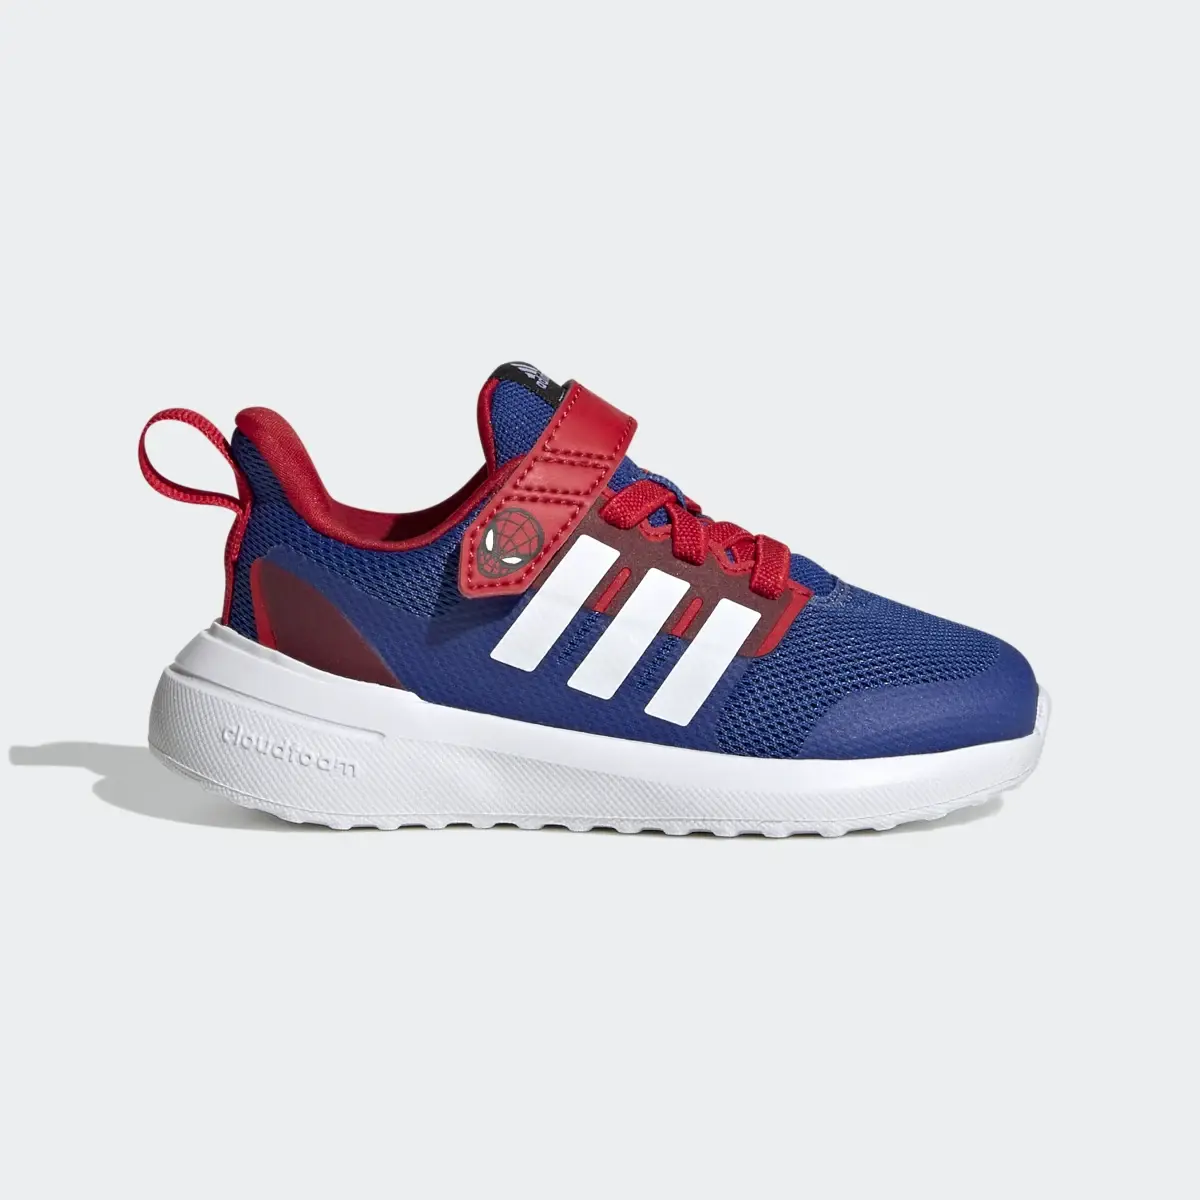 Adidas x Marvel FortaRun 2.0 Spider-Man Cloudfoam Sport Running Elastic Lace Top Strap Shoes. 2